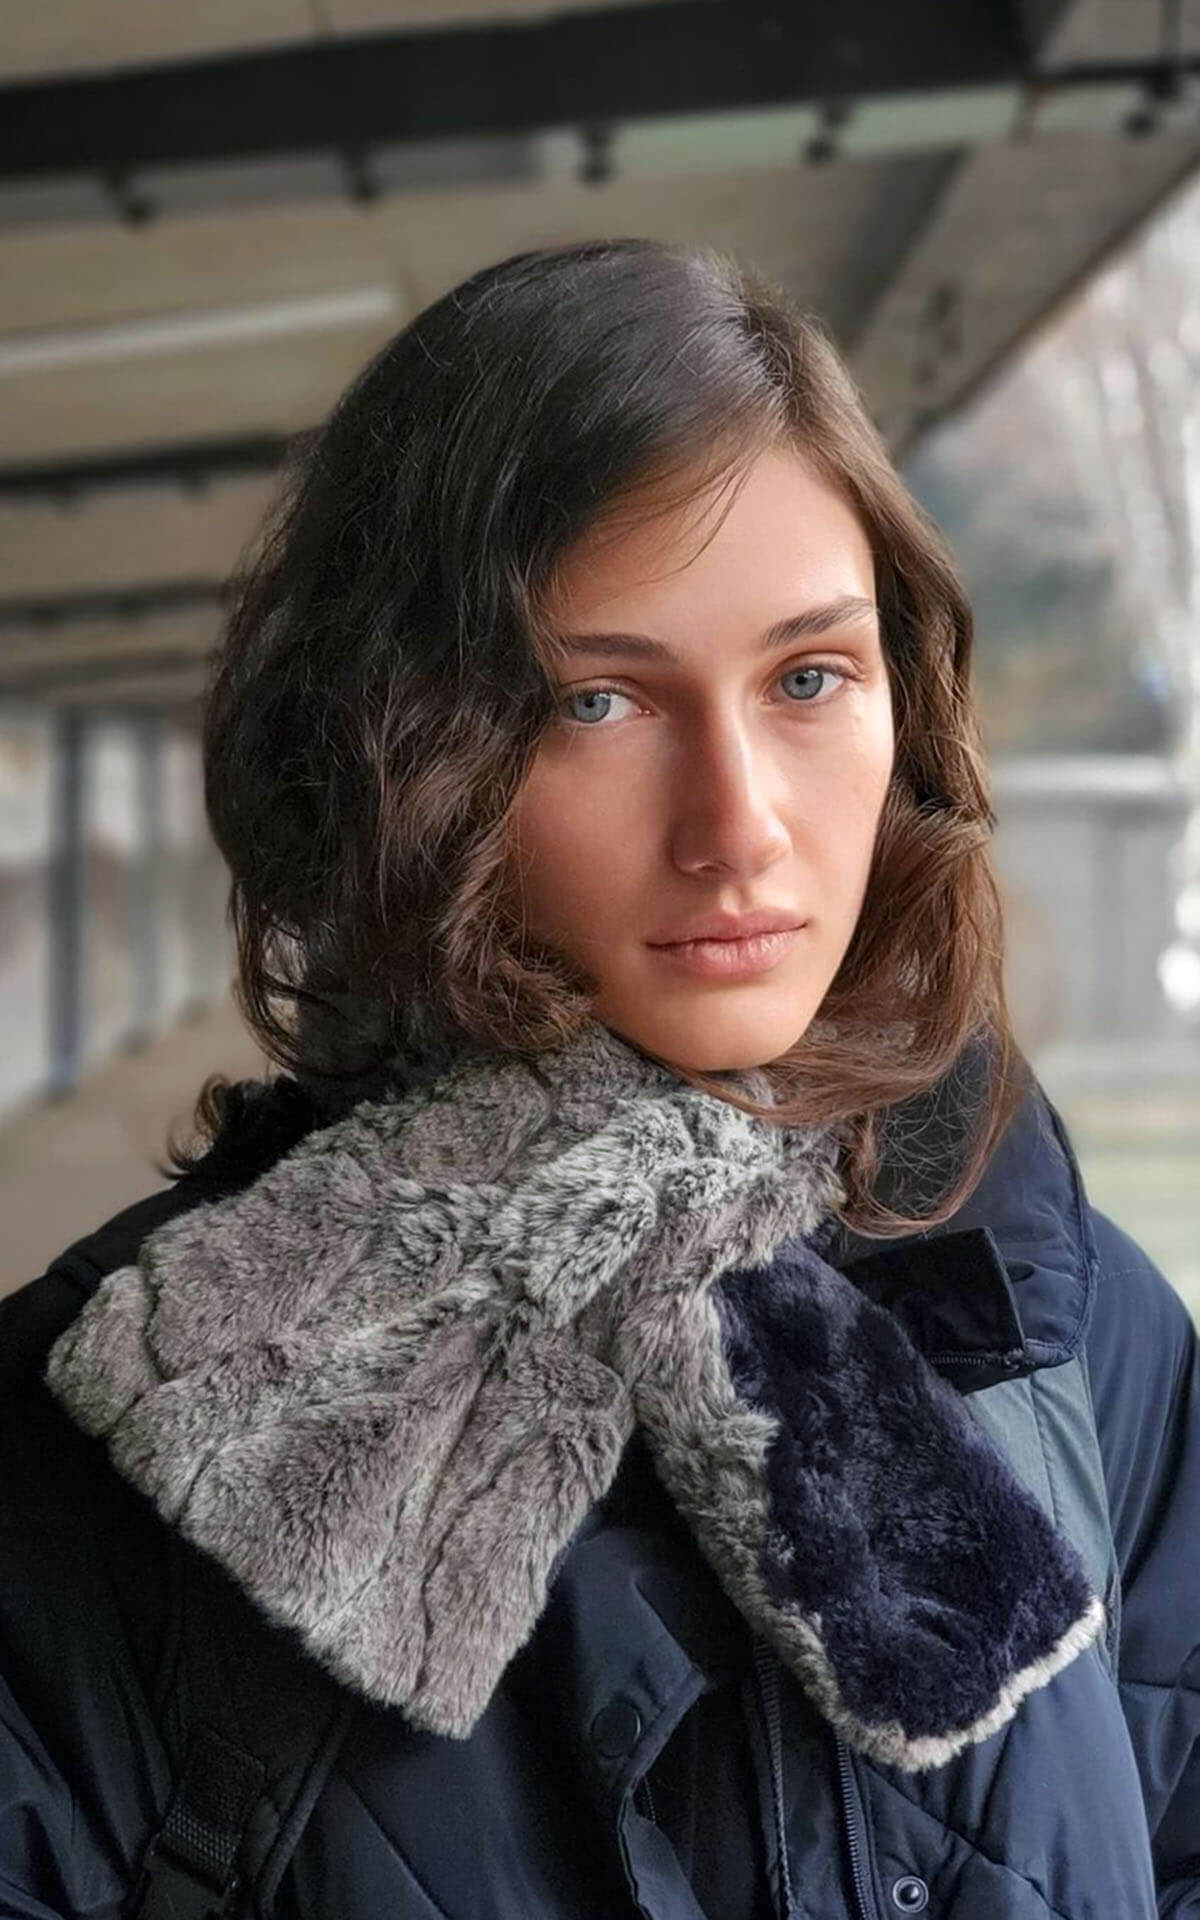 Model is Wearing Pull through scarf in Stormy Night with Cuddly Black Faux Fur